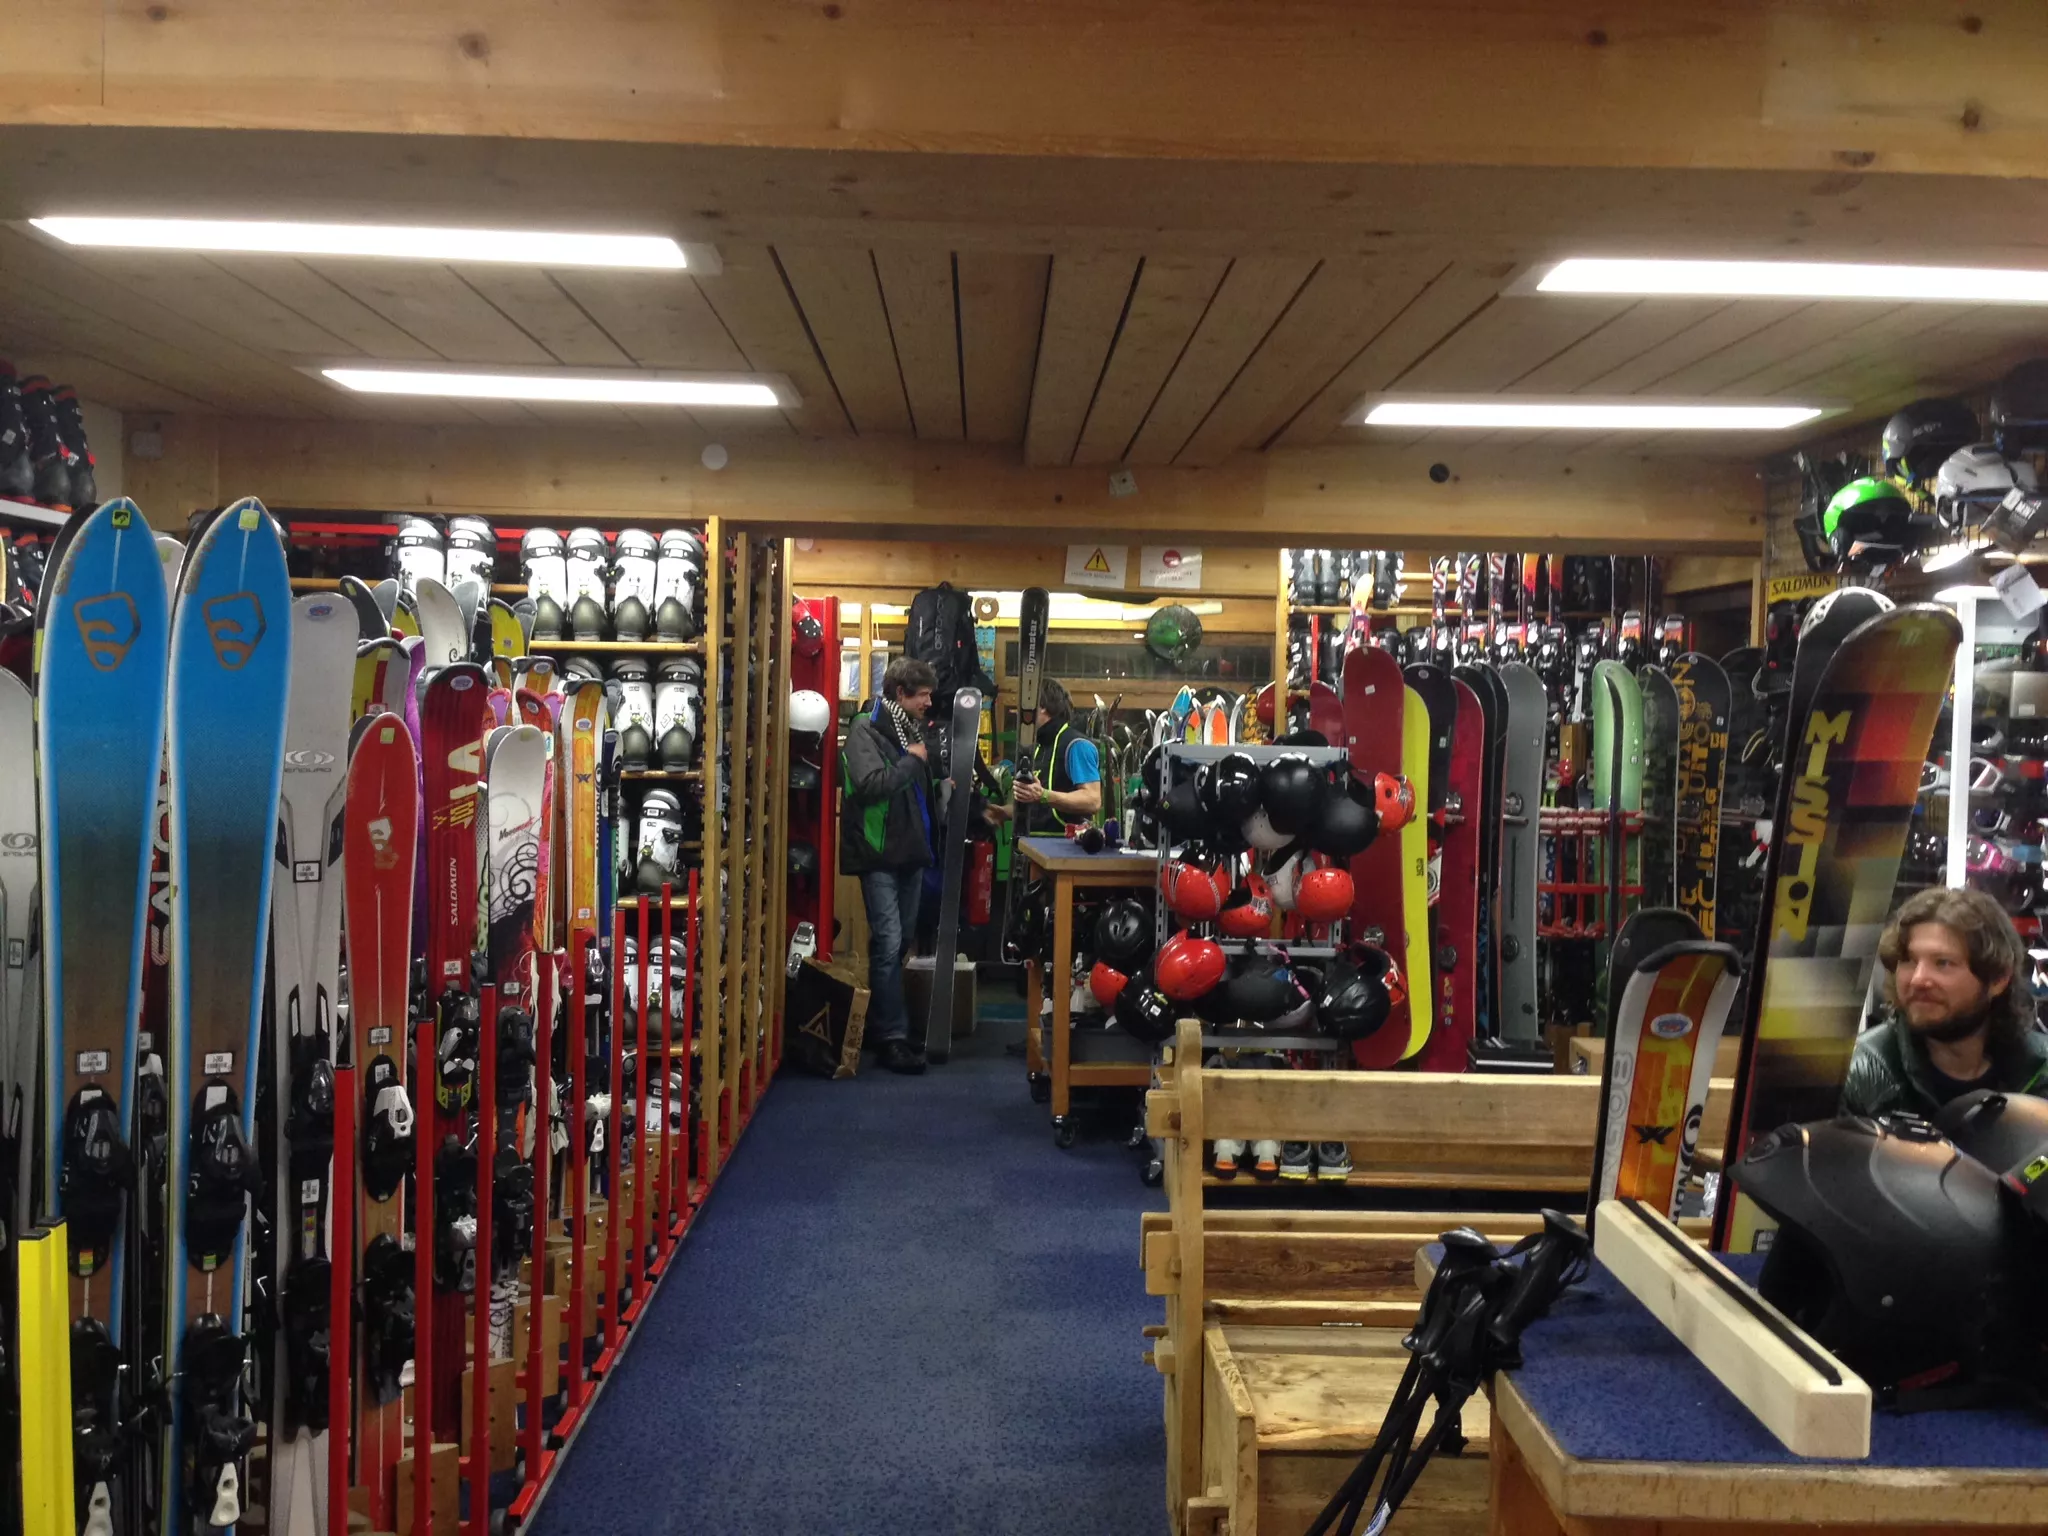 Browns Ski Rental in New Zealand, Australia and Oceania | Snowboarding,Skiing - Rated 0.8